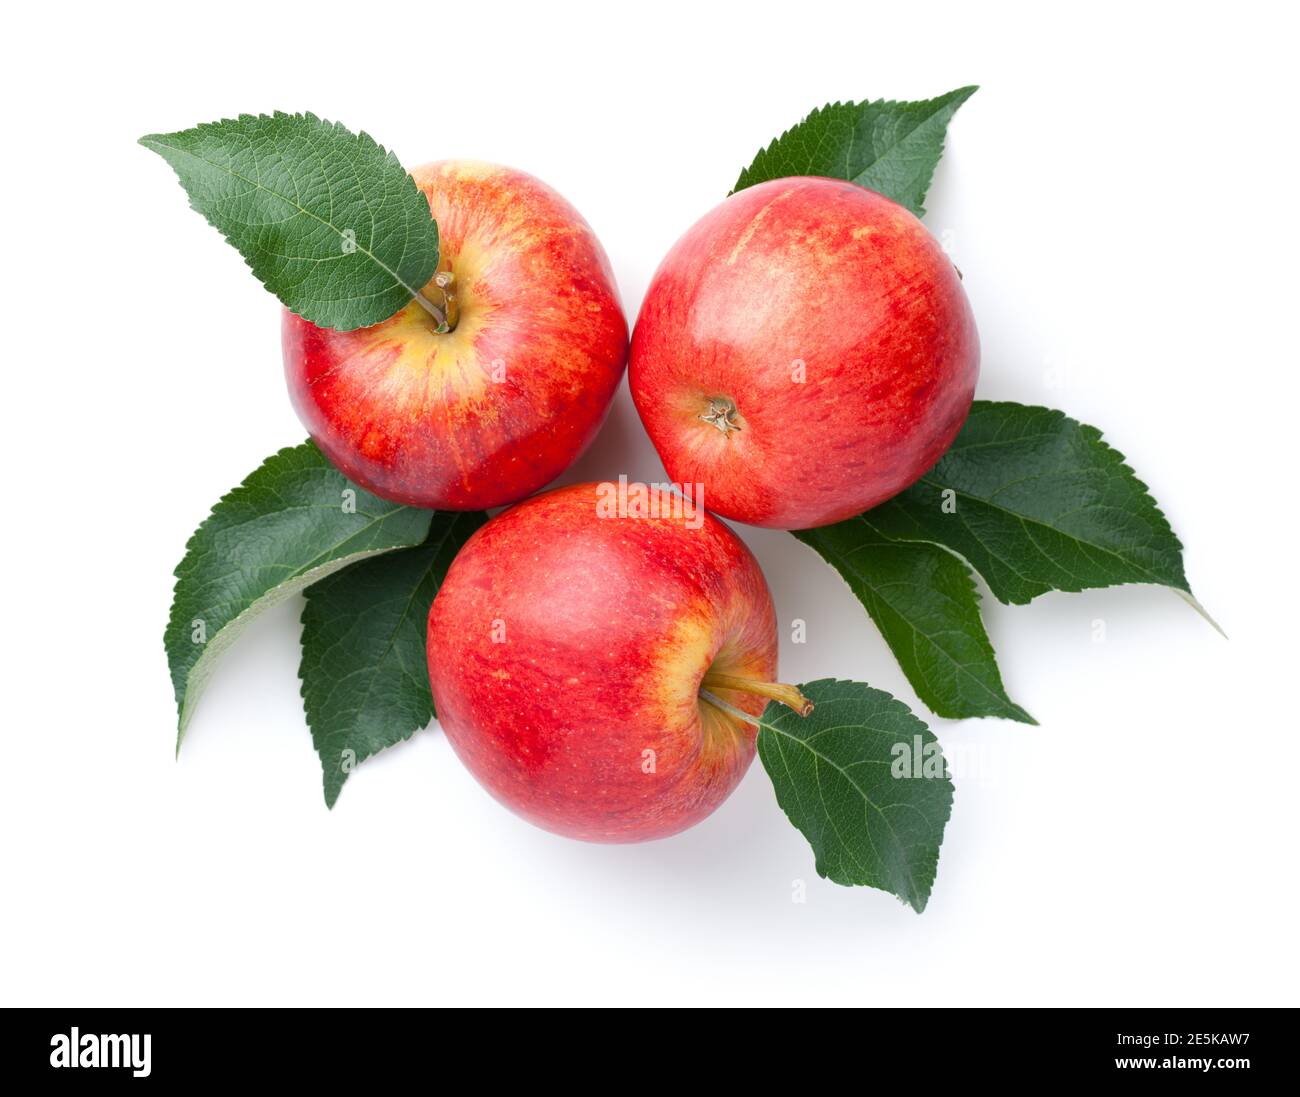 Red apples with leaves isolated over white background. Gala apple. Top view Stock Photo